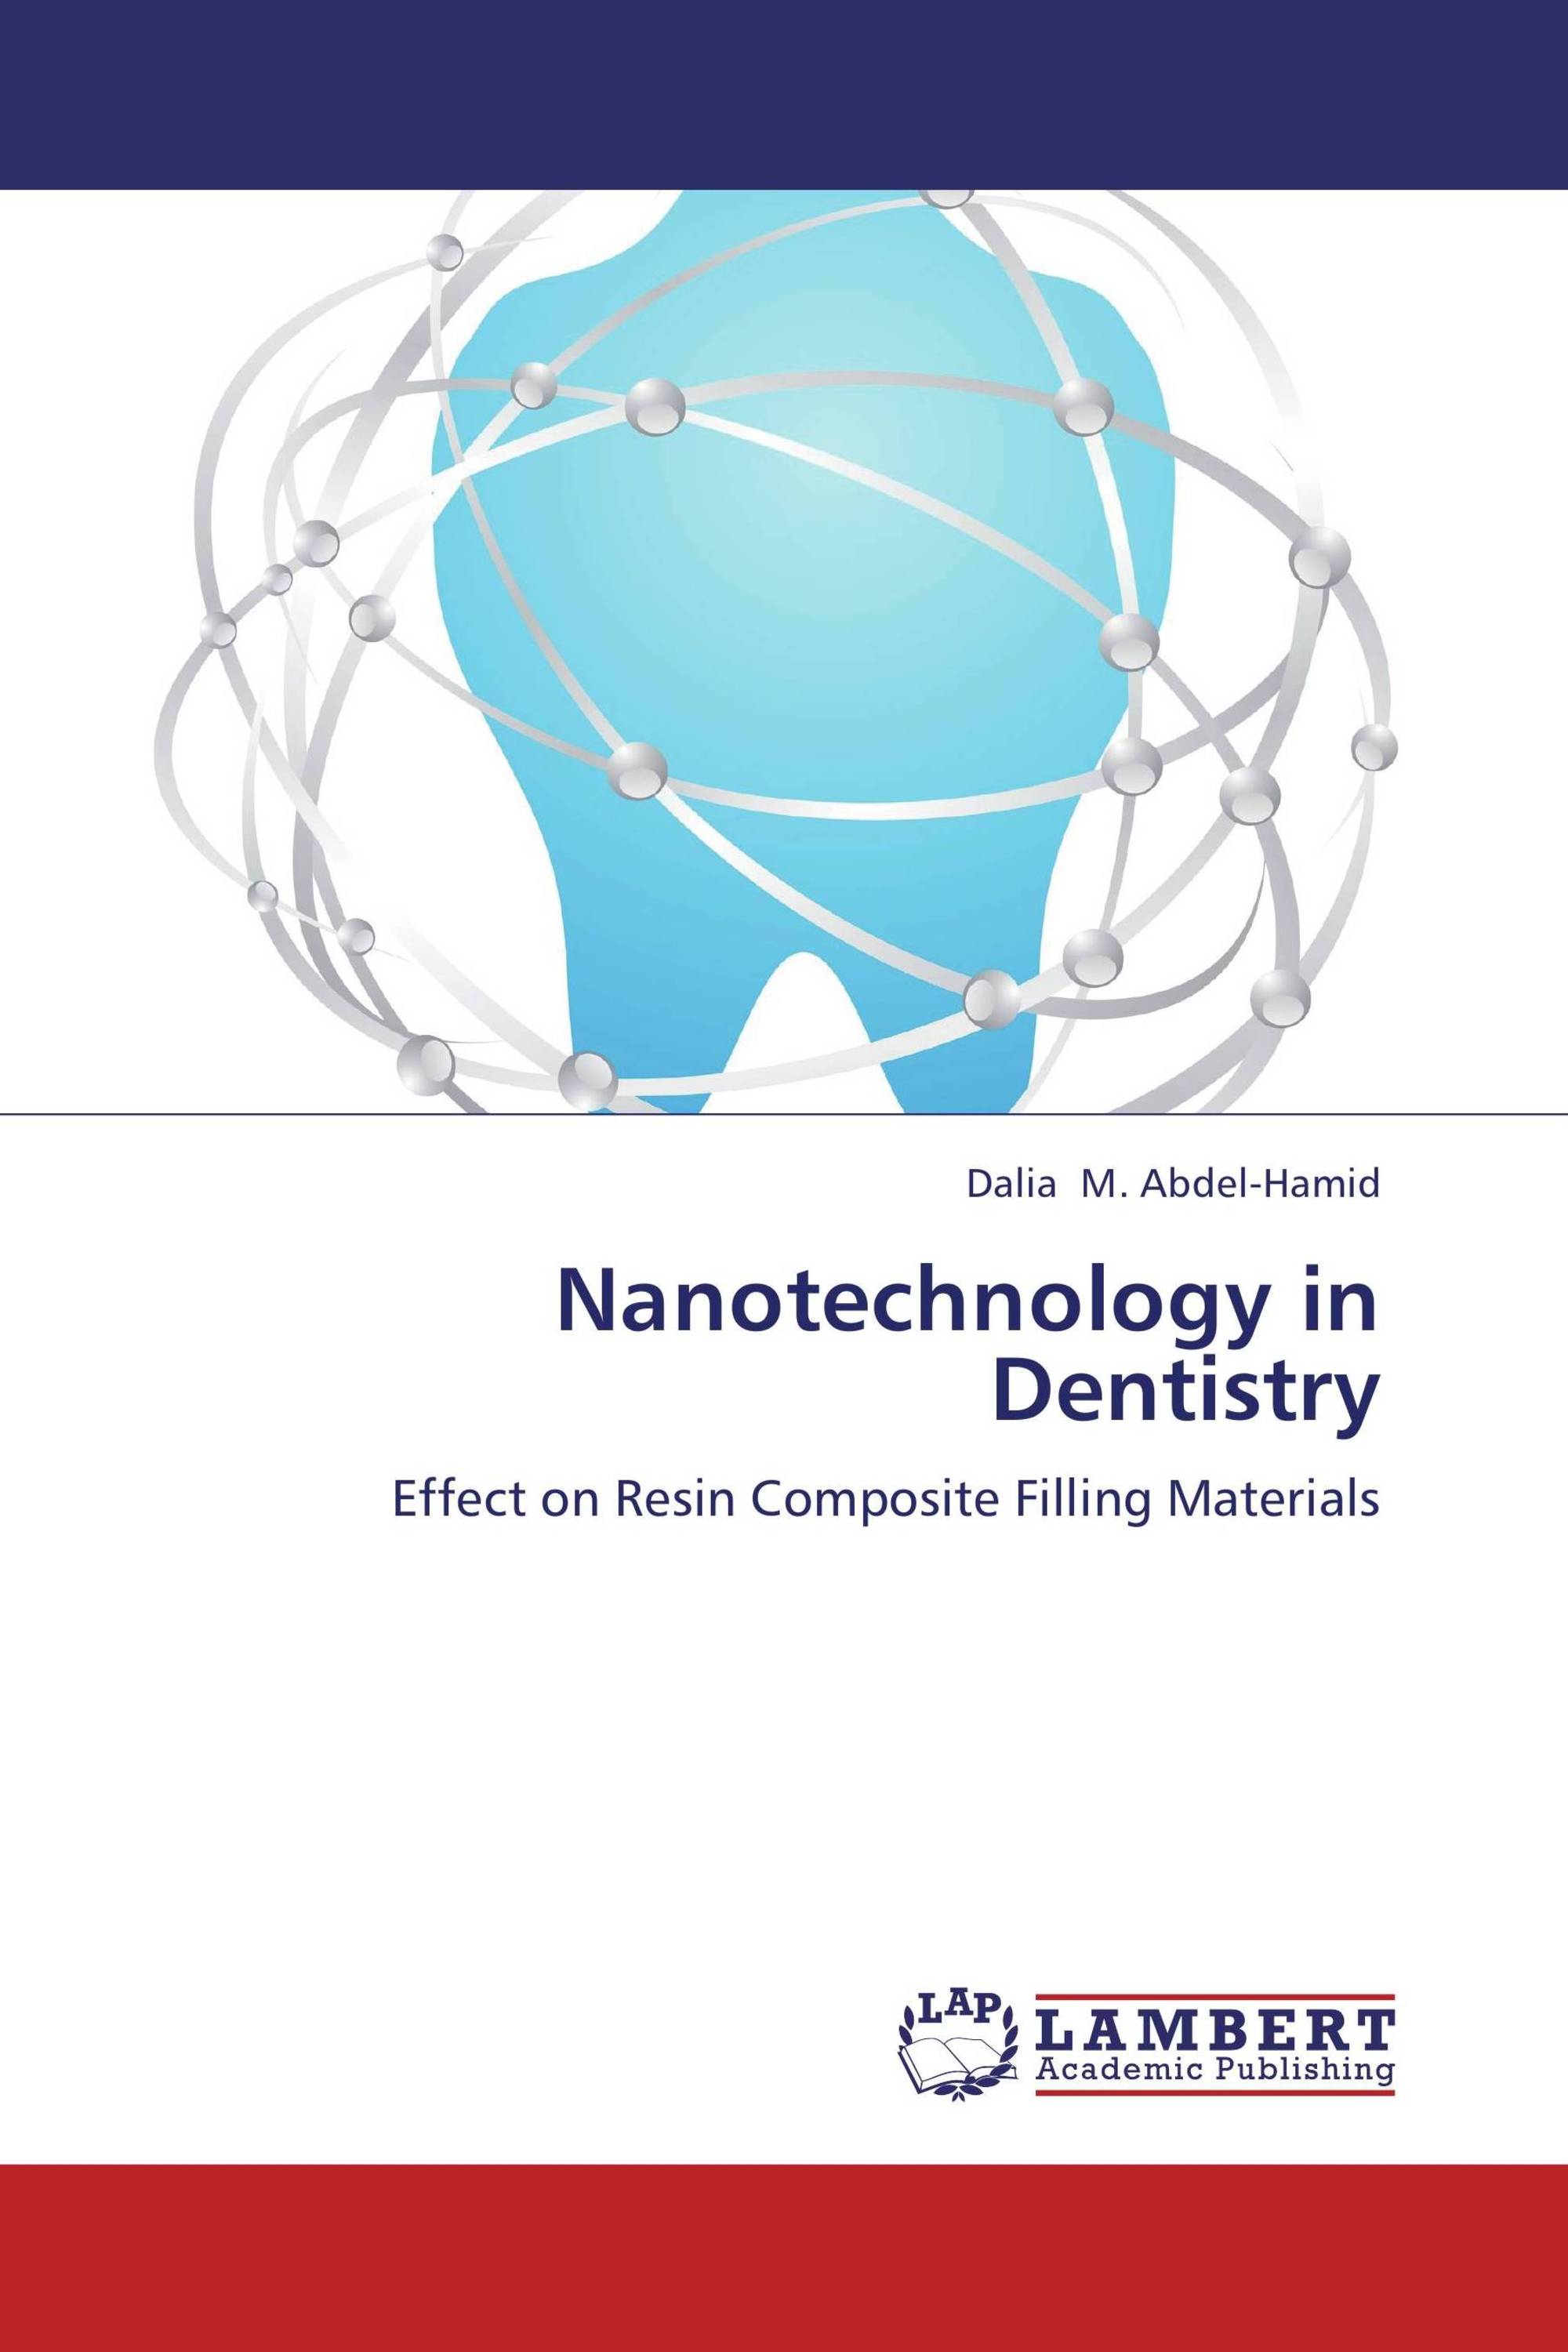 research on nanotechnology in dentistry